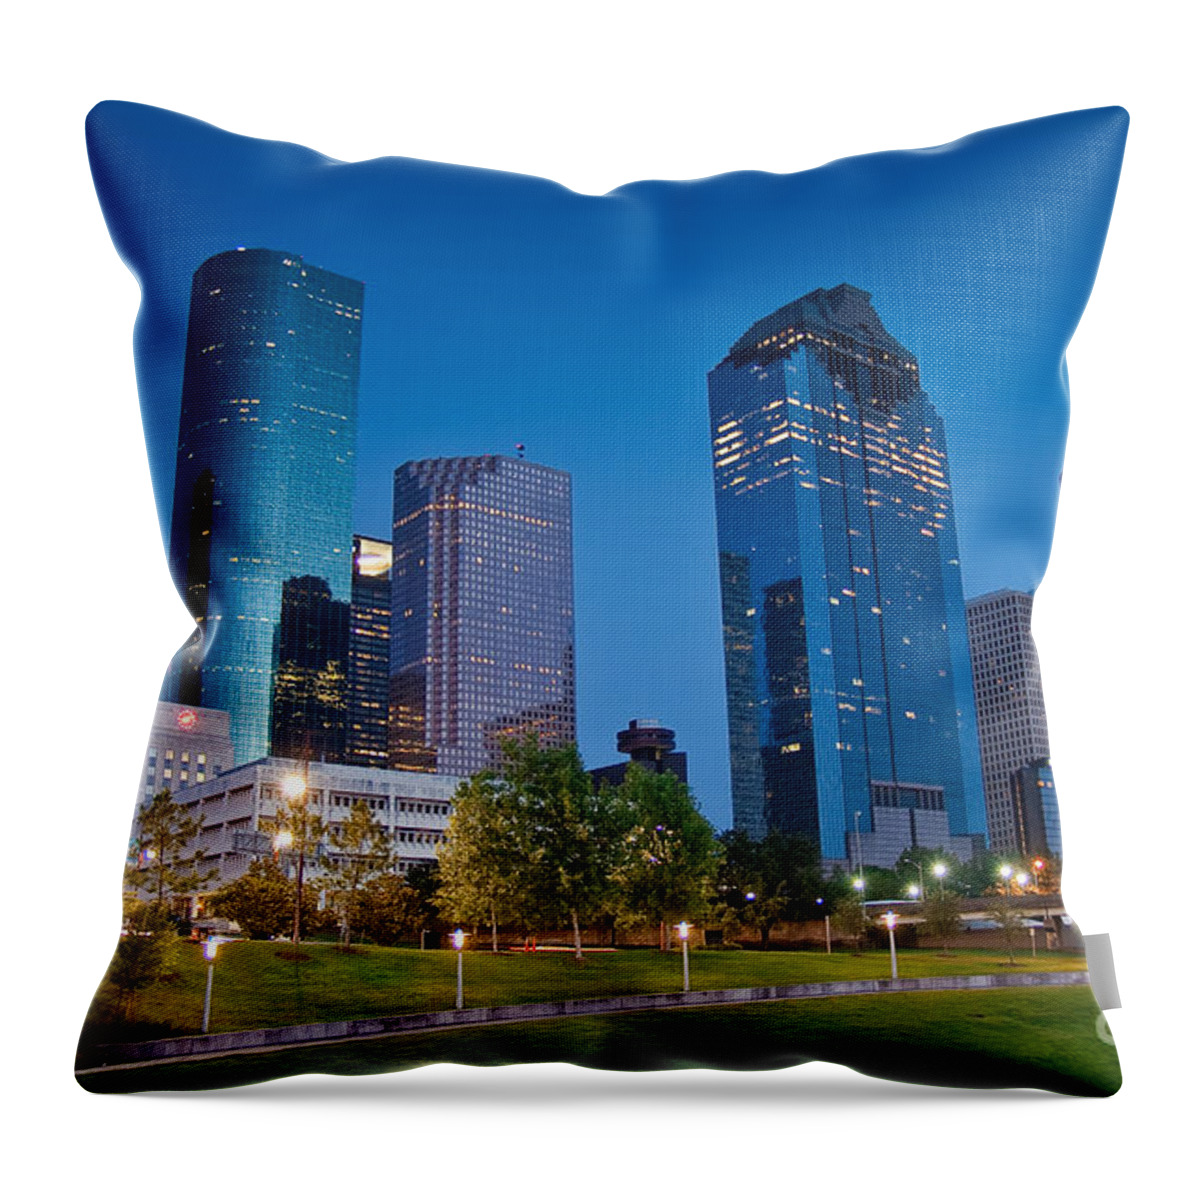 Downtown Throw Pillow featuring the photograph Downtown Houston by Olivier Steiner